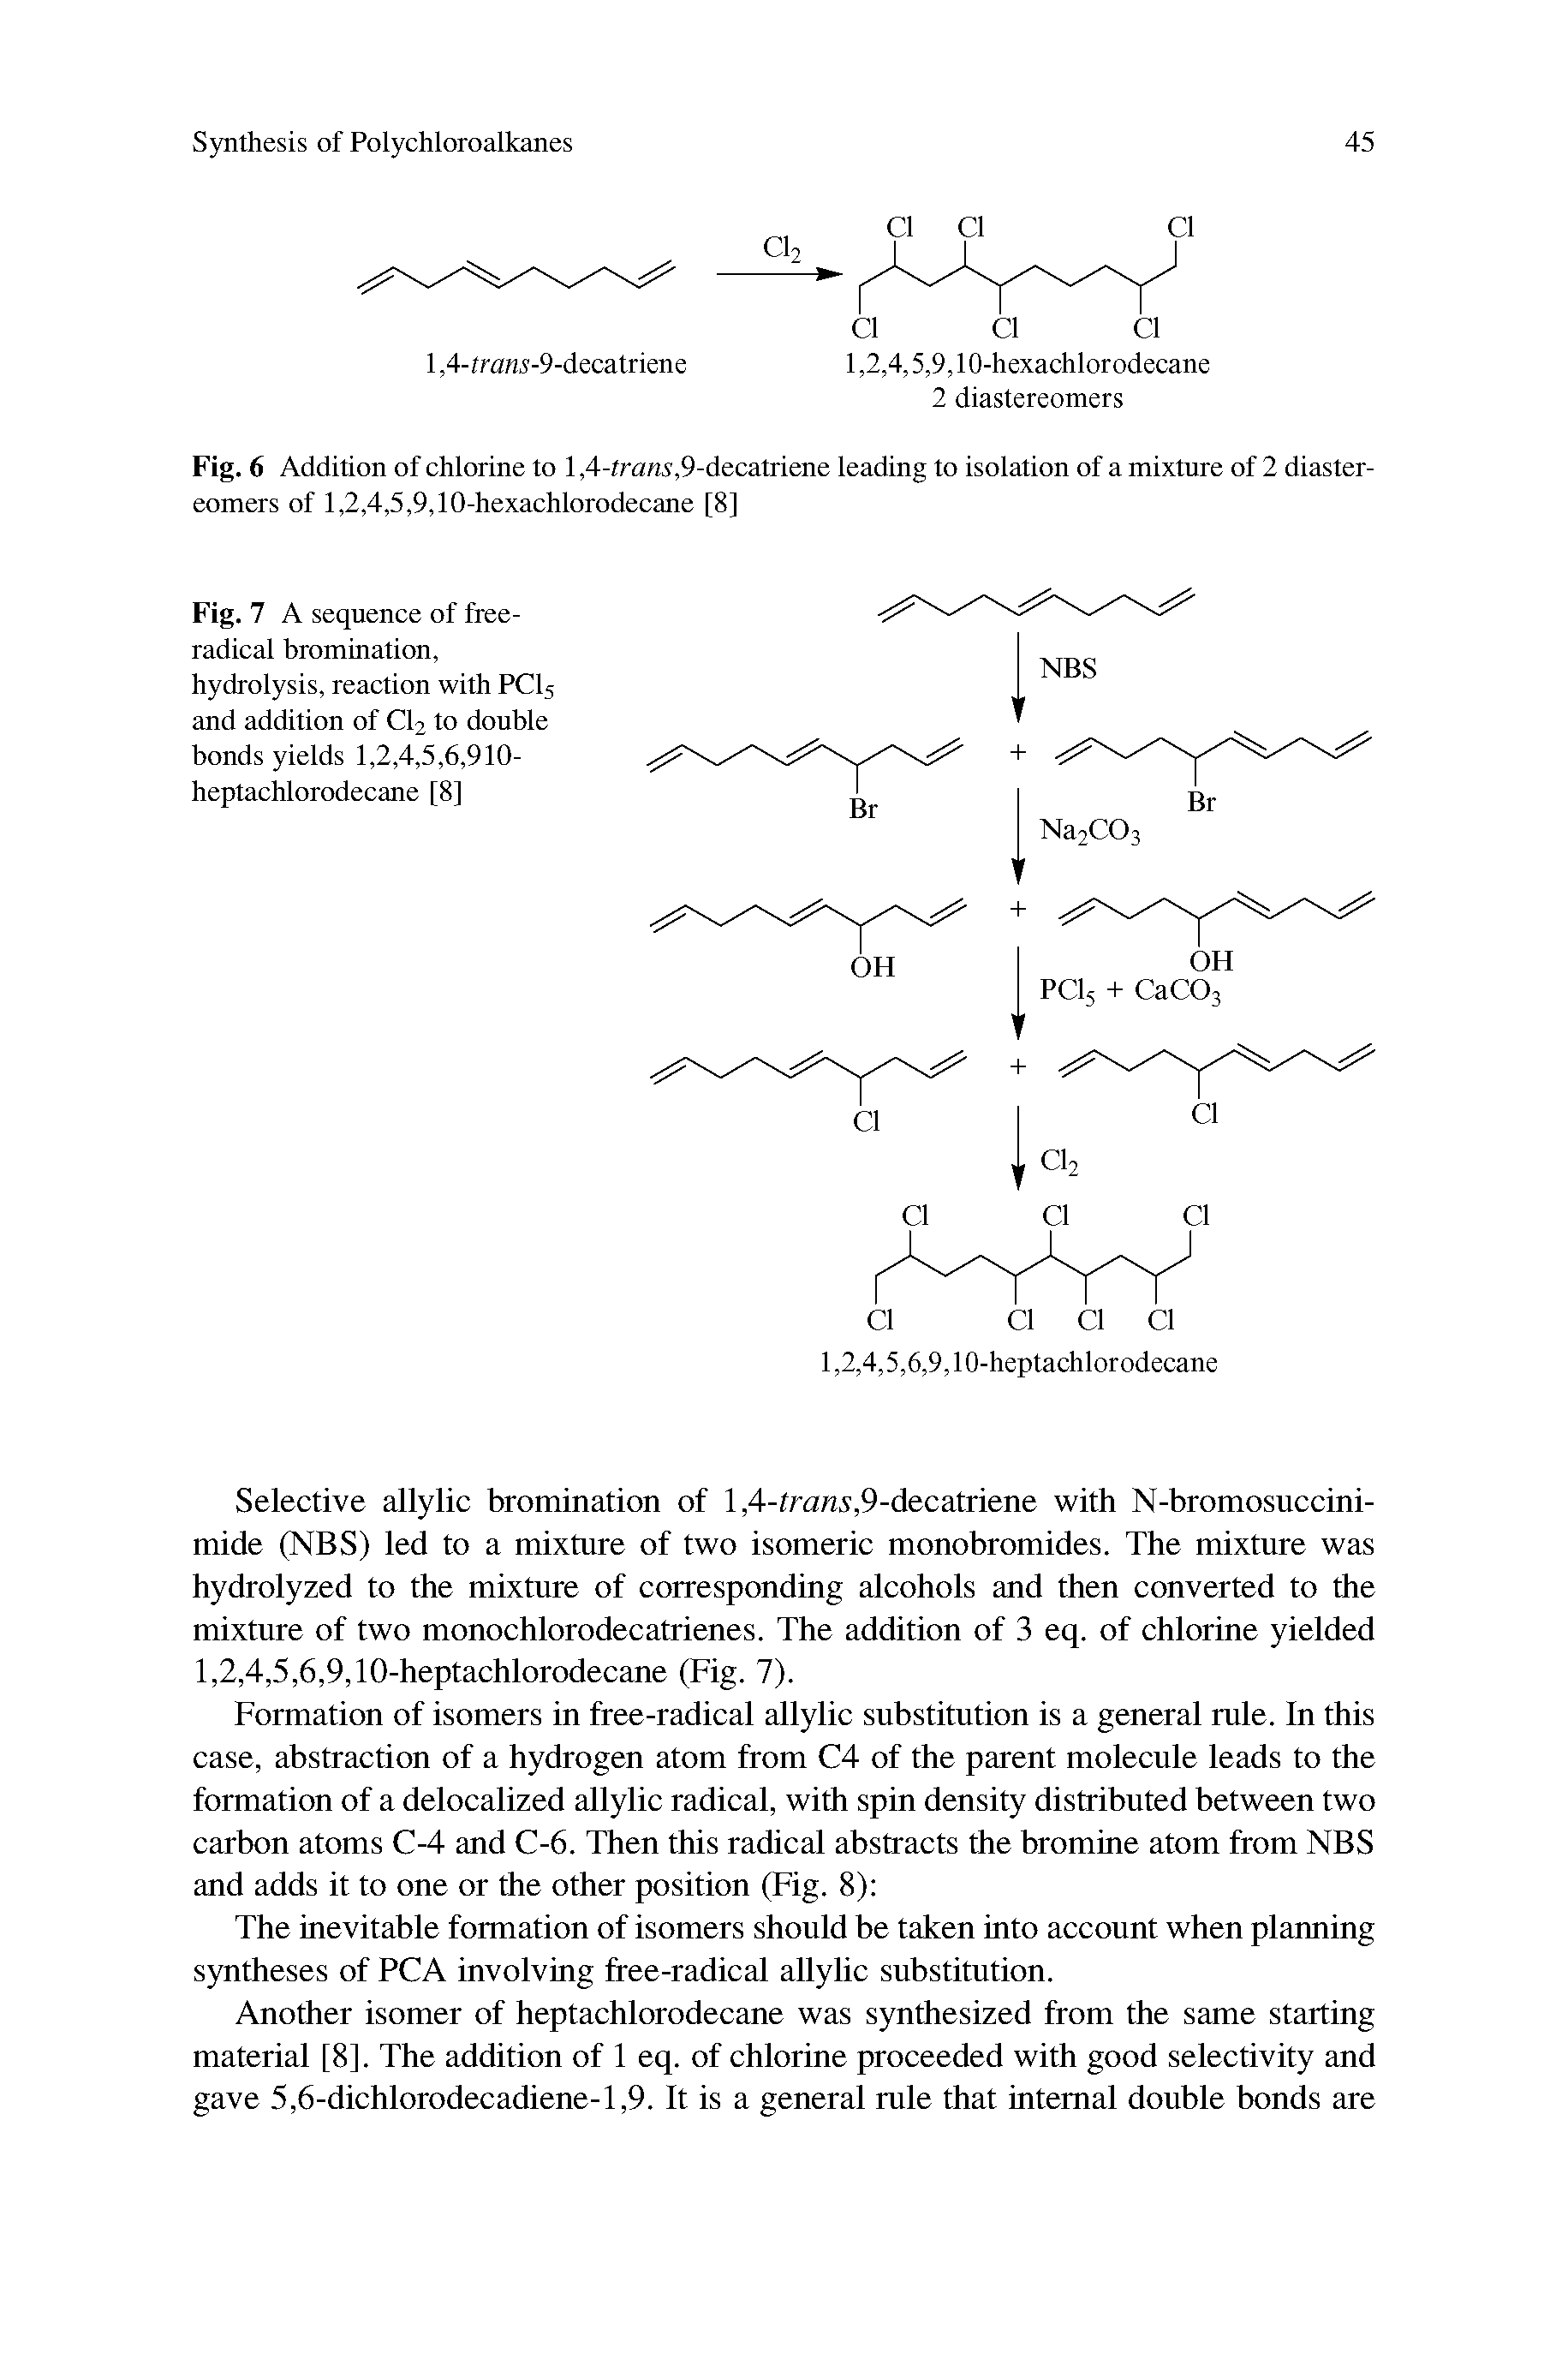 Fig. 7 A sequence of free-radical bromination, hydrolysis, reaction with PCI5 and addition of Cl, to double bonds yields 1,2,4,5,6,910-heptachlorodecane [8]...